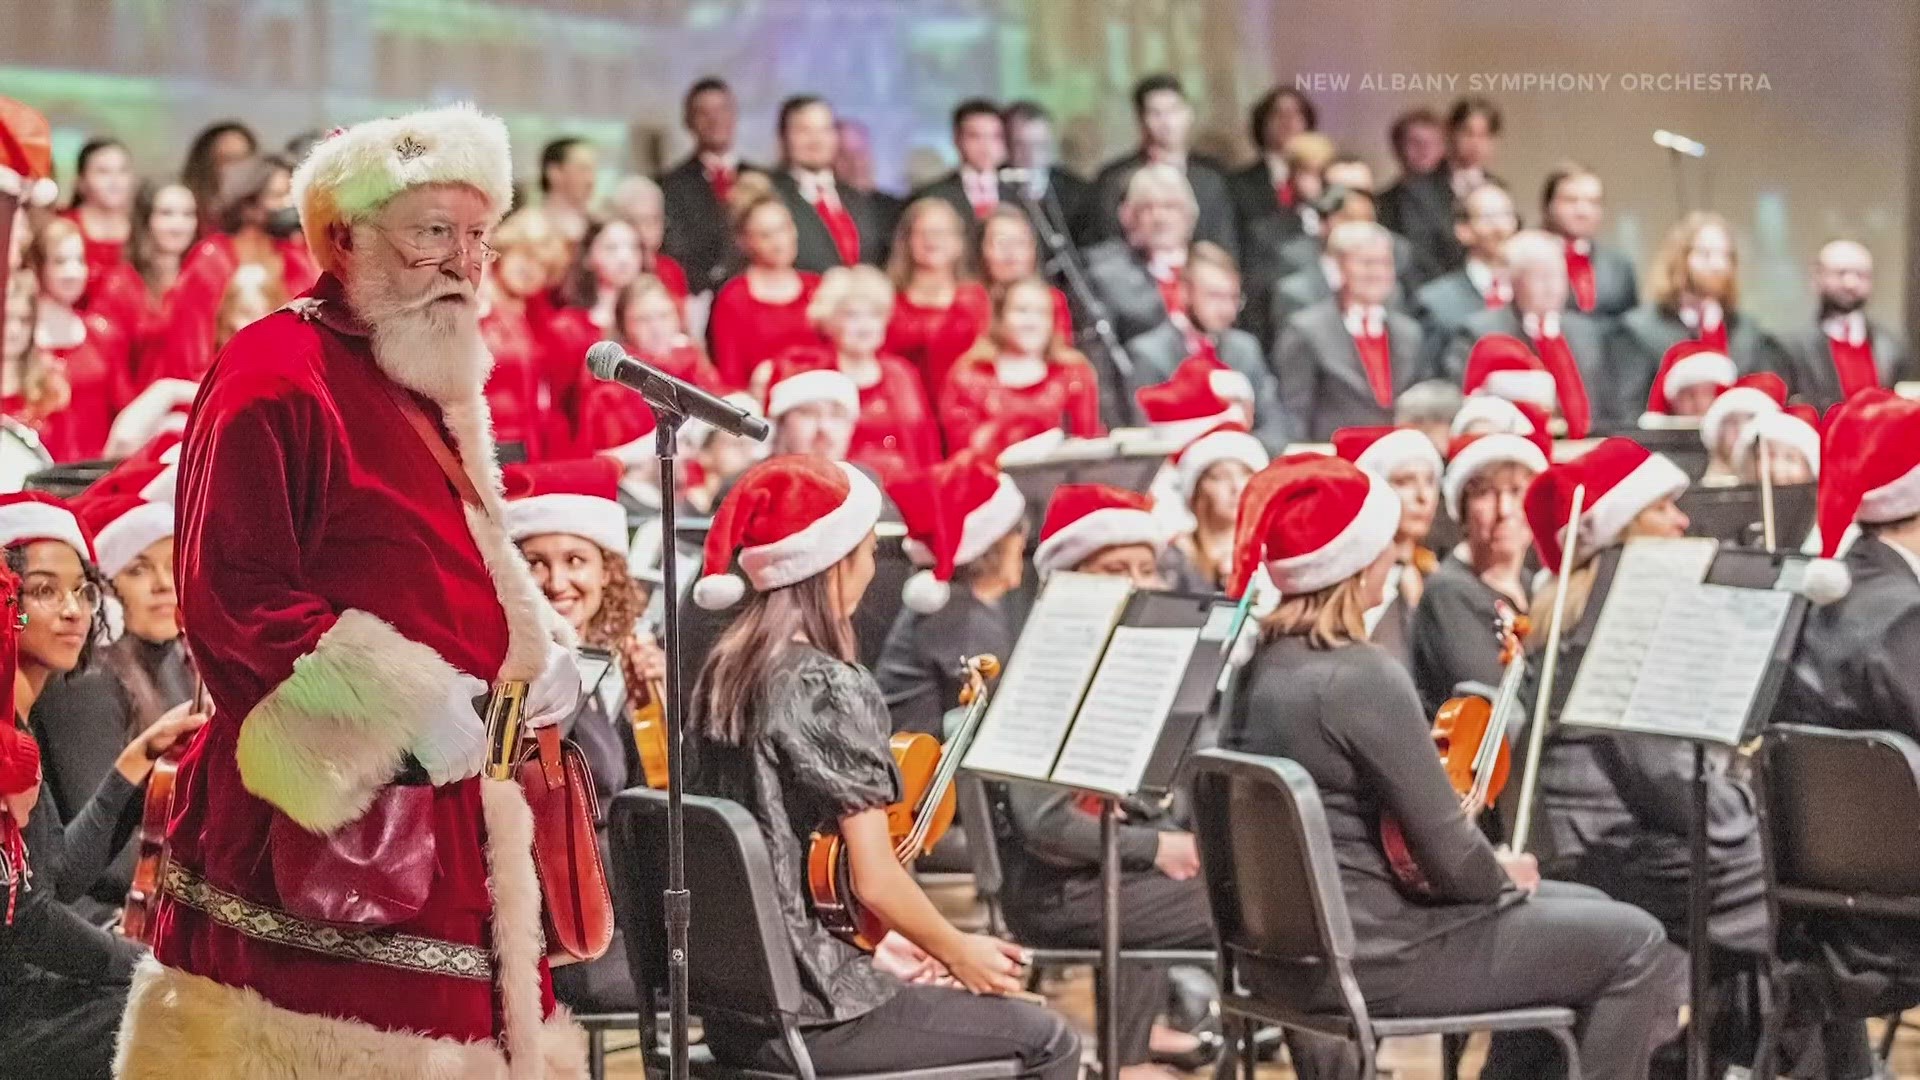 In just one month, the orchestra will be joined by a very special visitor allt he way from the North Pole.